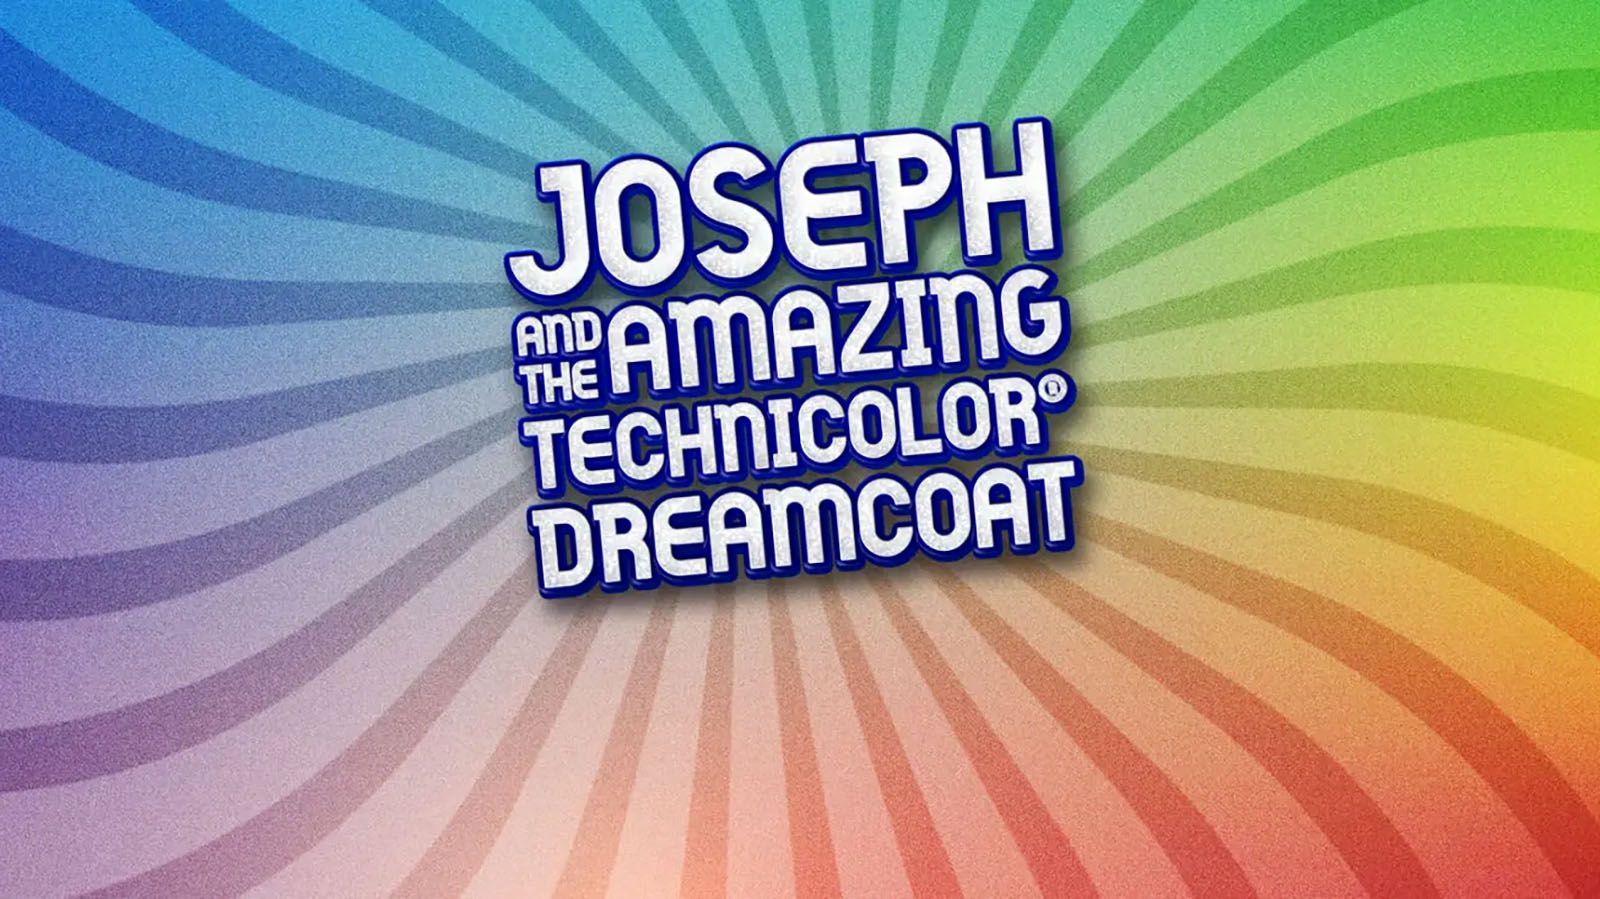 Excelsior Youth Theater will put on Joseph and the Amazing Technicolor Dreamcoat at the DeKalb Outdoor Theater.